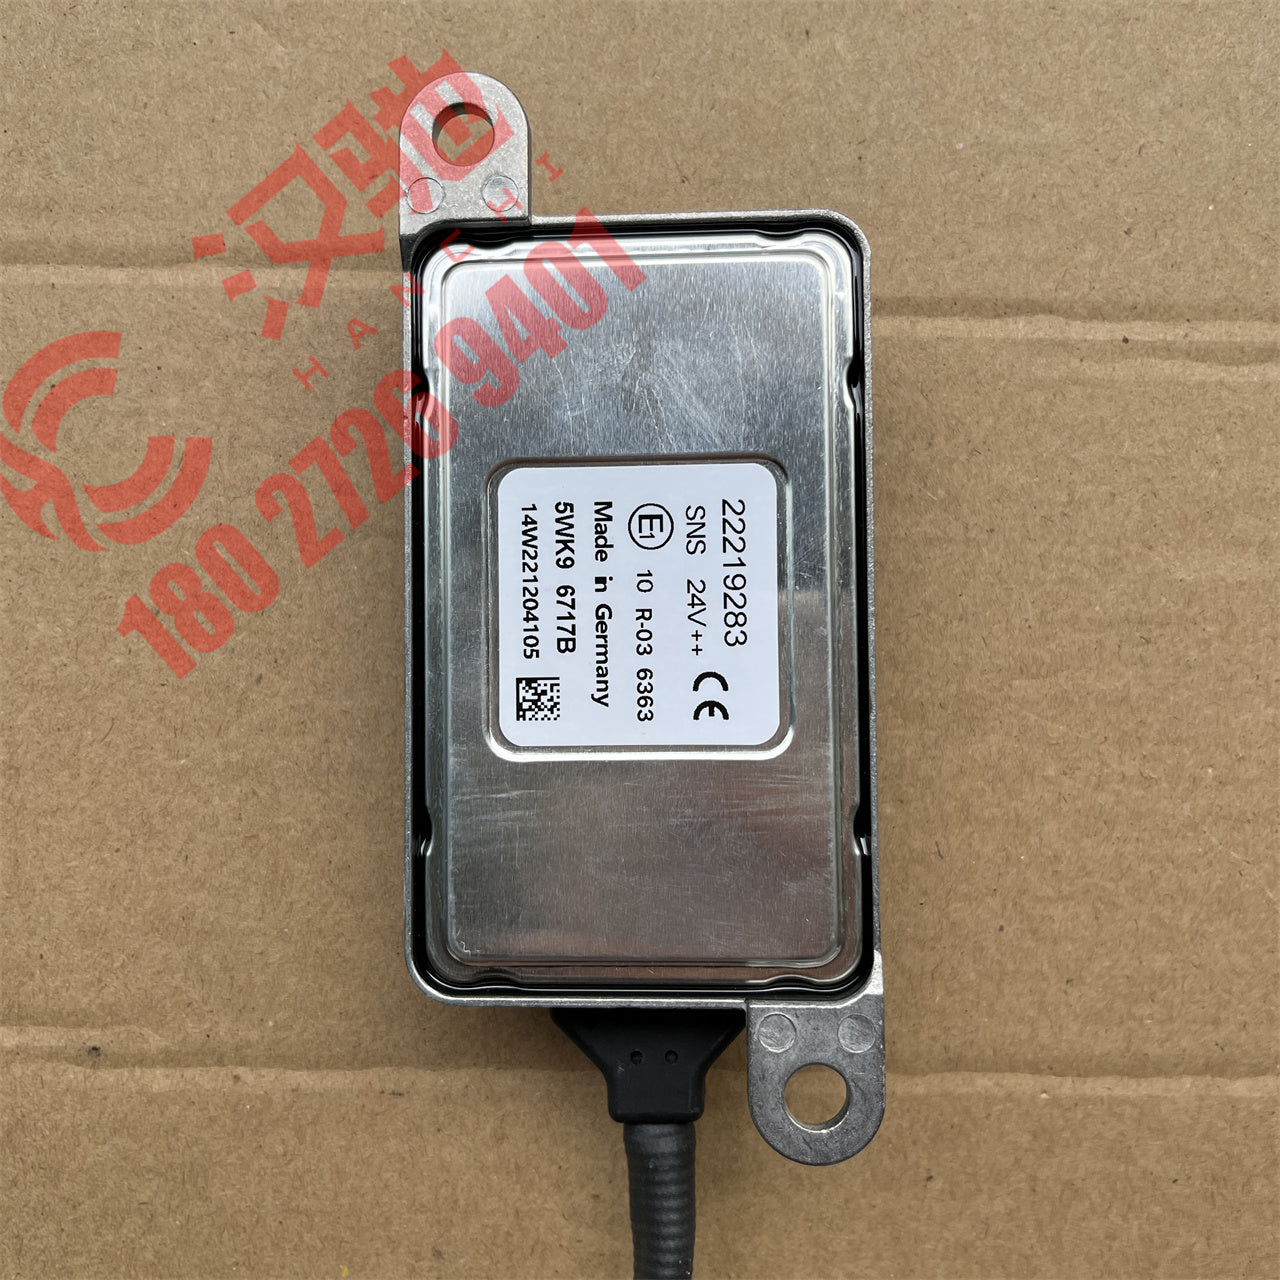 OEM: 5WK9 6717B 22219283Material: ABS metalColor: black silverOrigin: Made in ChinaWeight: 400gPacking List: 1* Nitrogen oxide sensor NOx More ServiceWe can provide OEM Manufacturing serviceWe can Be your one-step solution for Auto PartsWe can provide technical scheme for you Feel Free to Contact Us, We will get back to you as soon as possible.